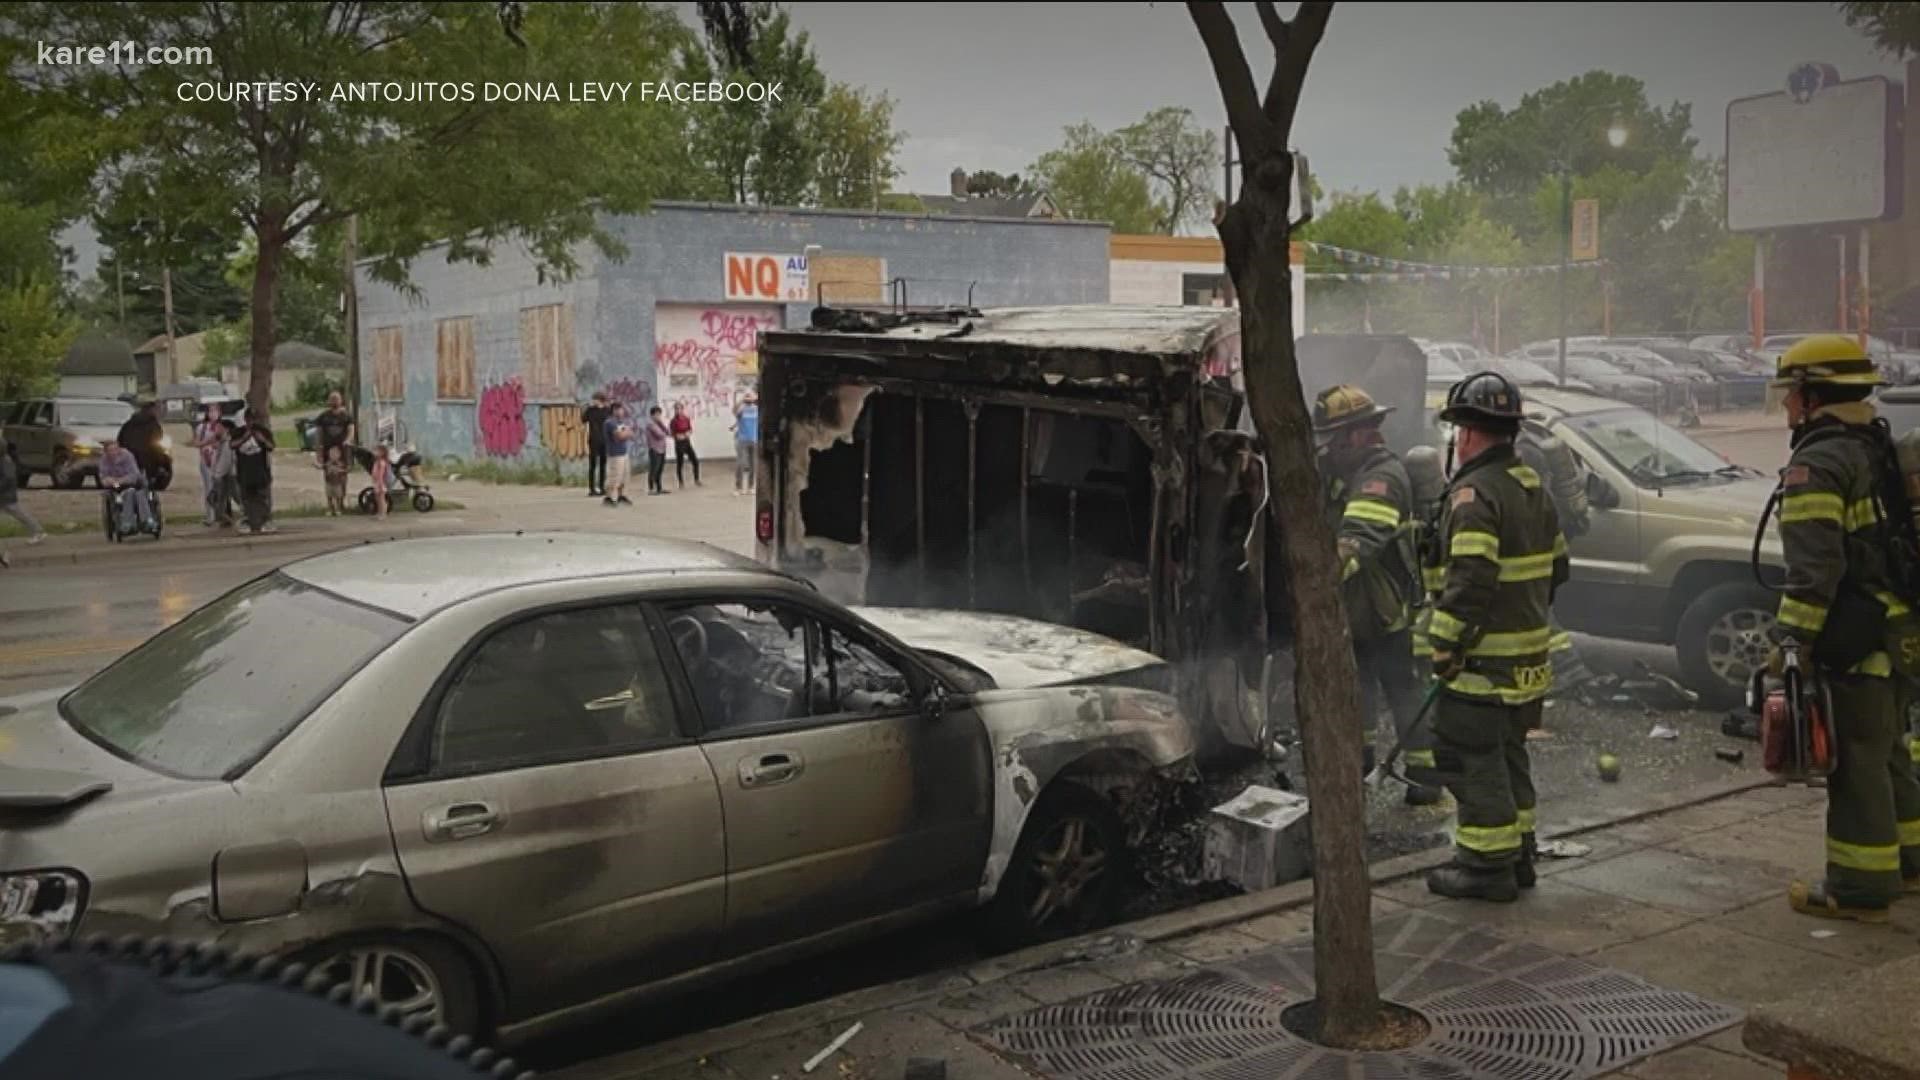 One of the owners was inside the truck when it caught fire, but was rescued.